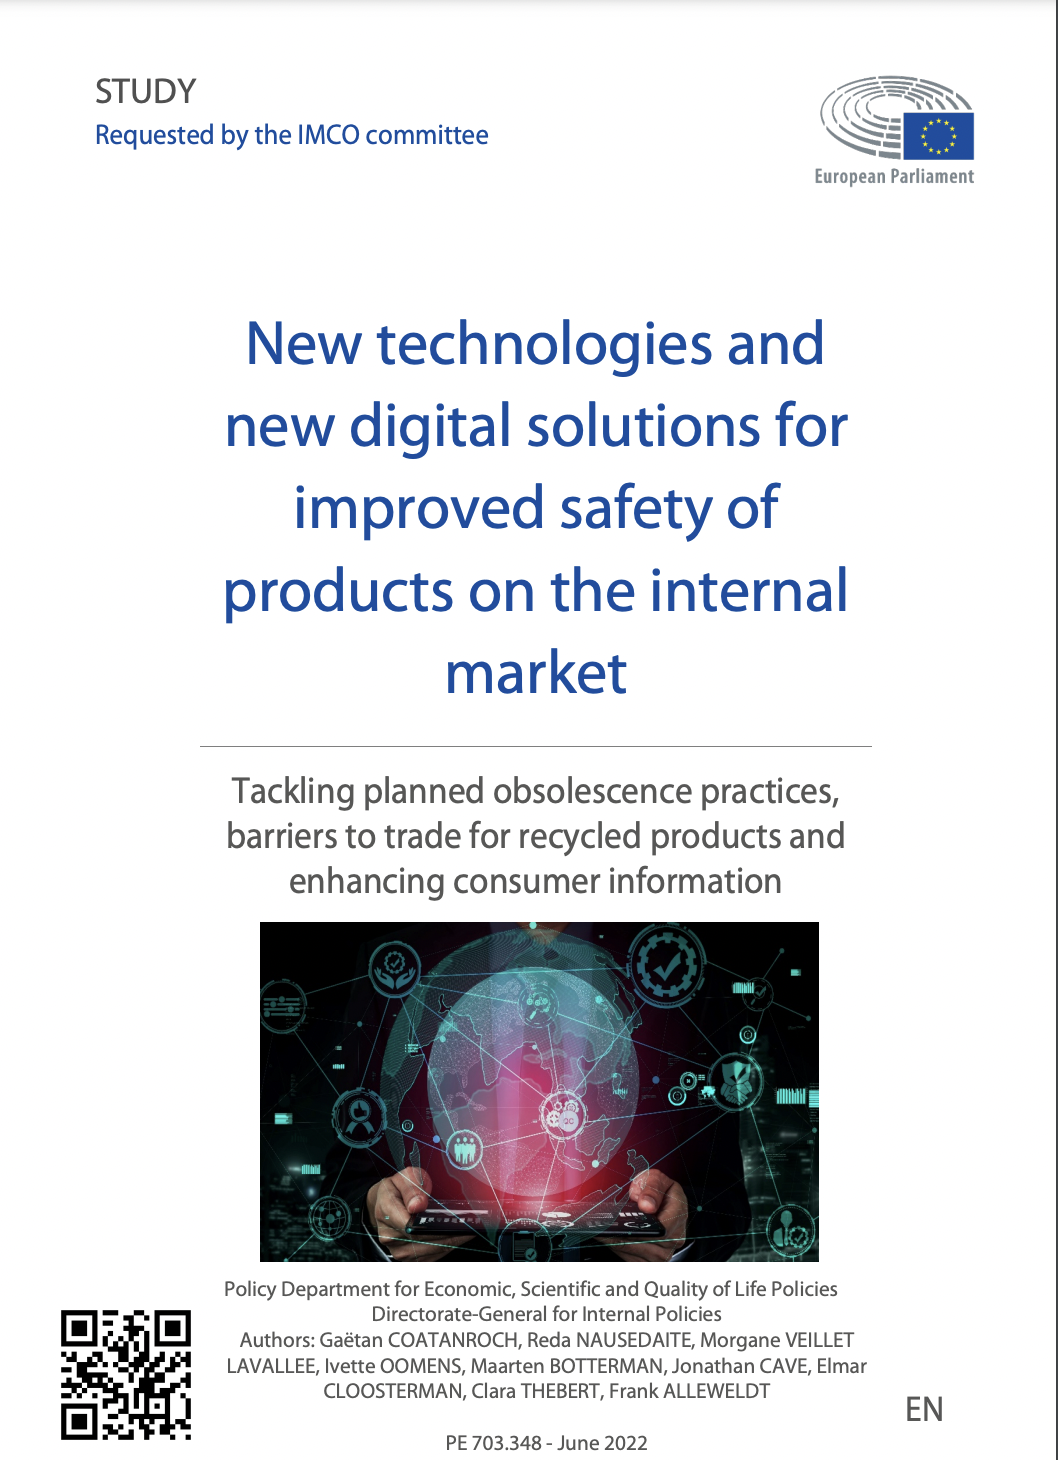 How do new technologies and digital solutions affect product safety and durability?